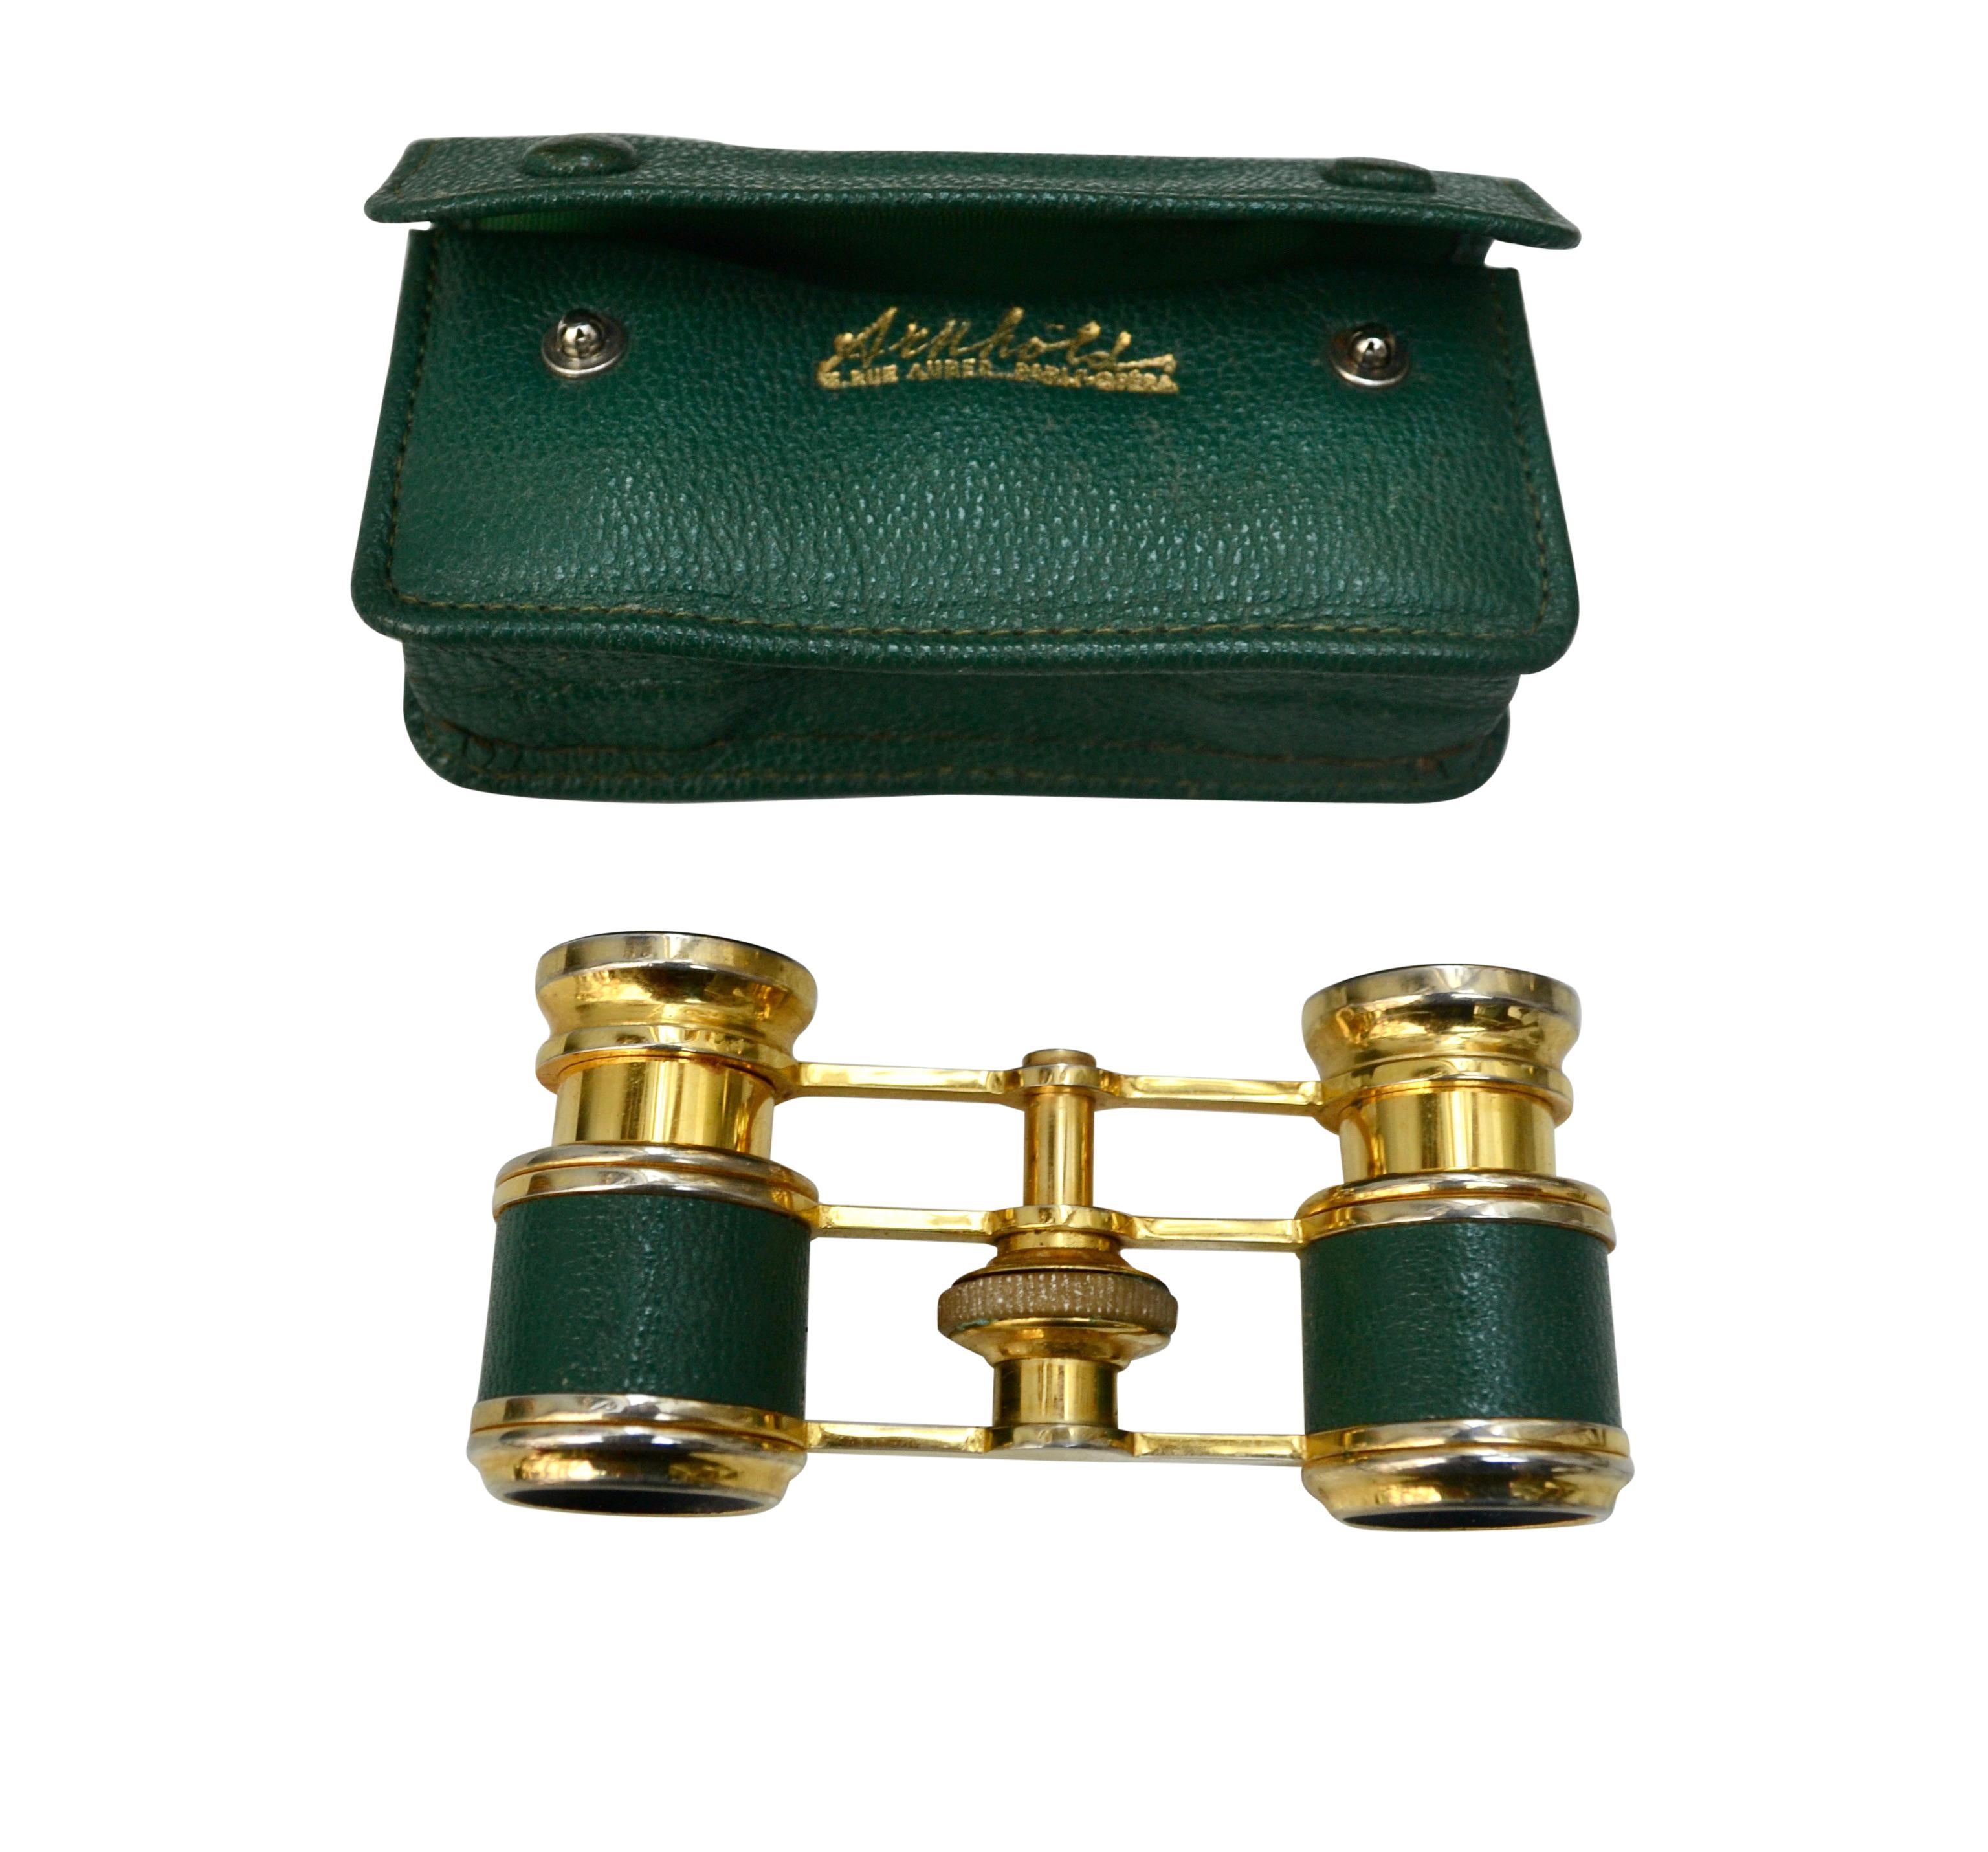 Machine-Made  Brass and Green Leather Opera Glasses From Arnhold Paris In Original Case 